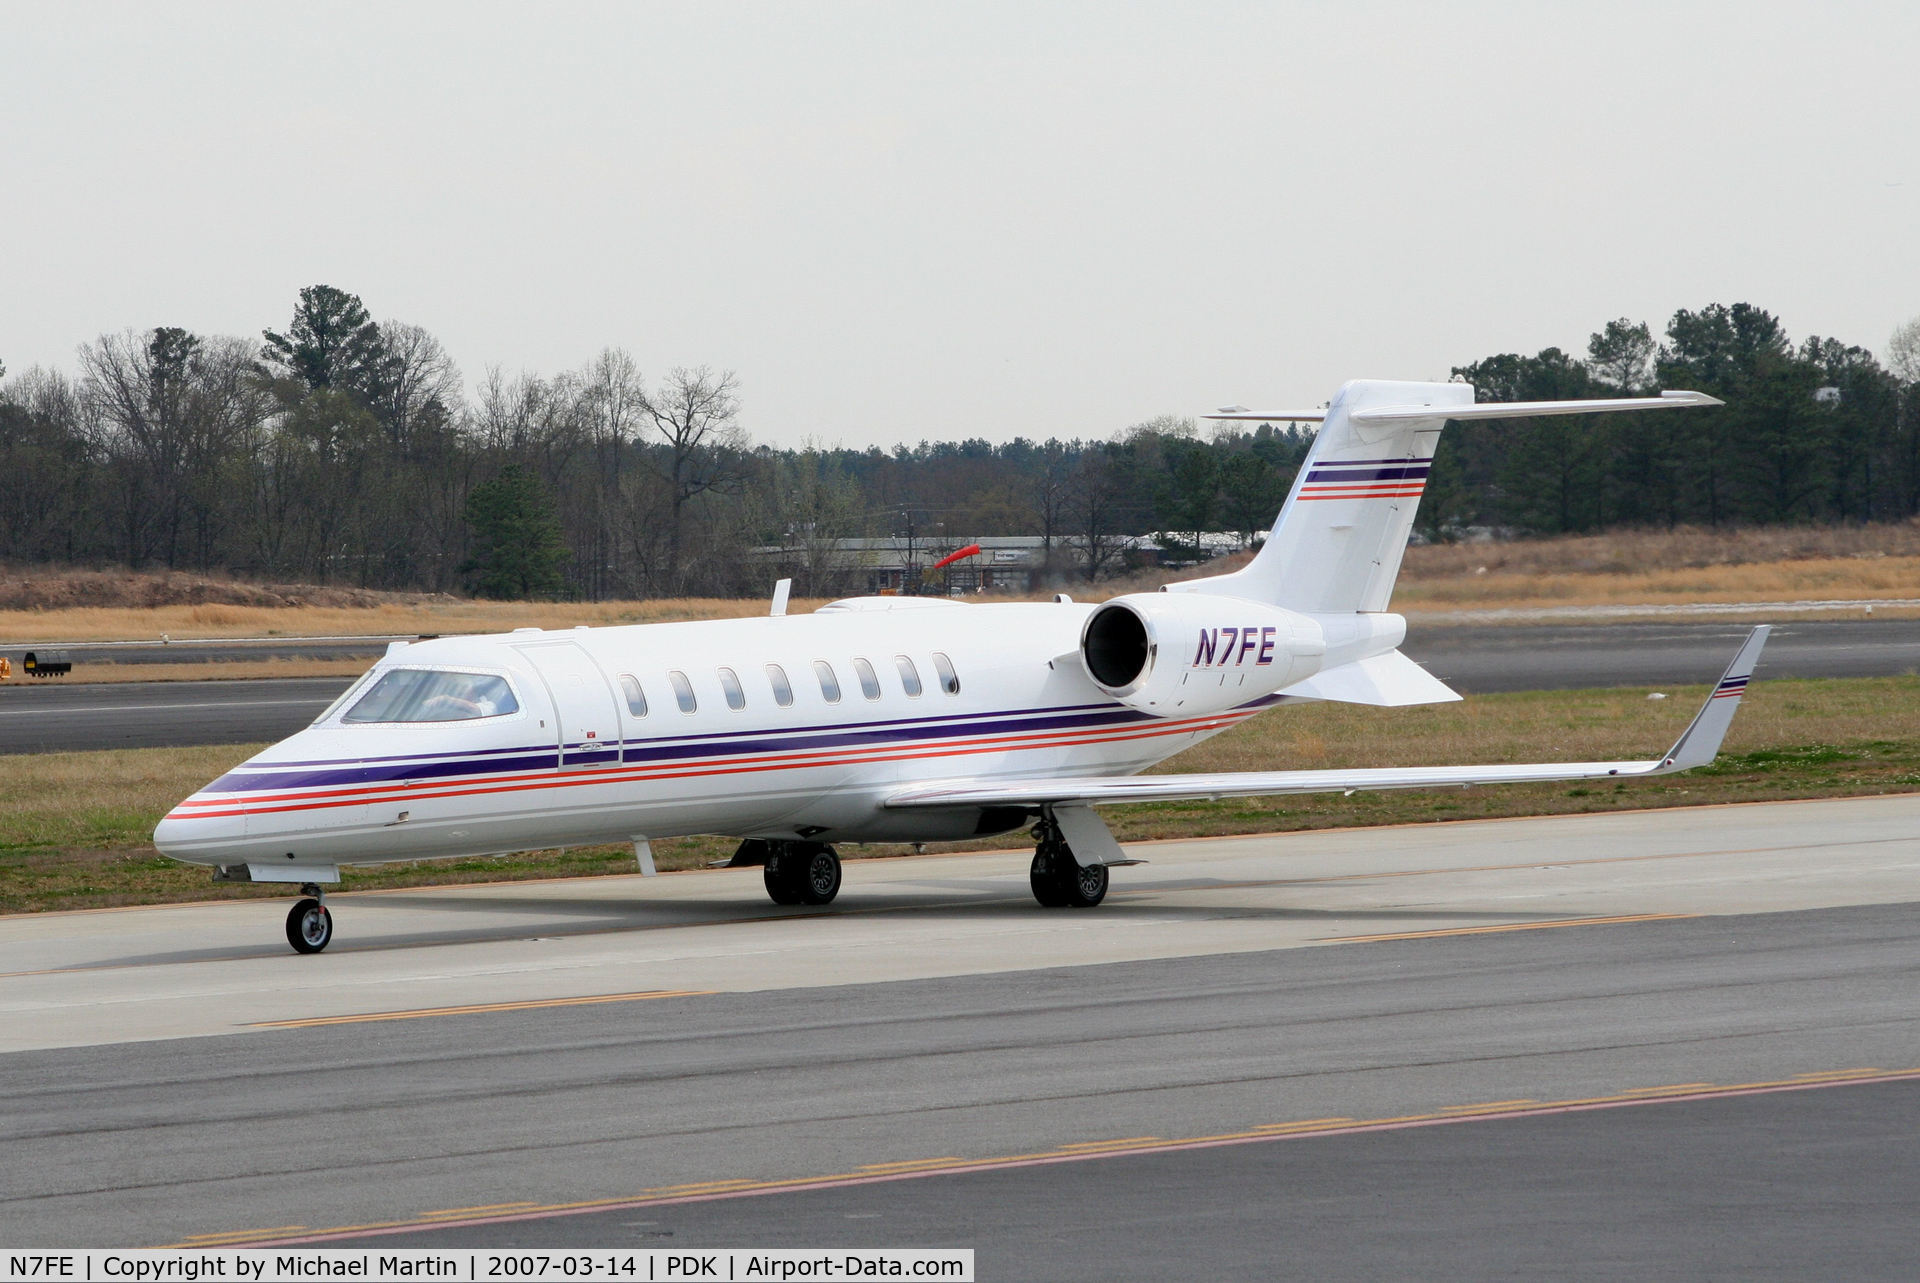 N7FE, 2000 Learjet Inc 45 C/N 46, Taxing to Signature Flight Services